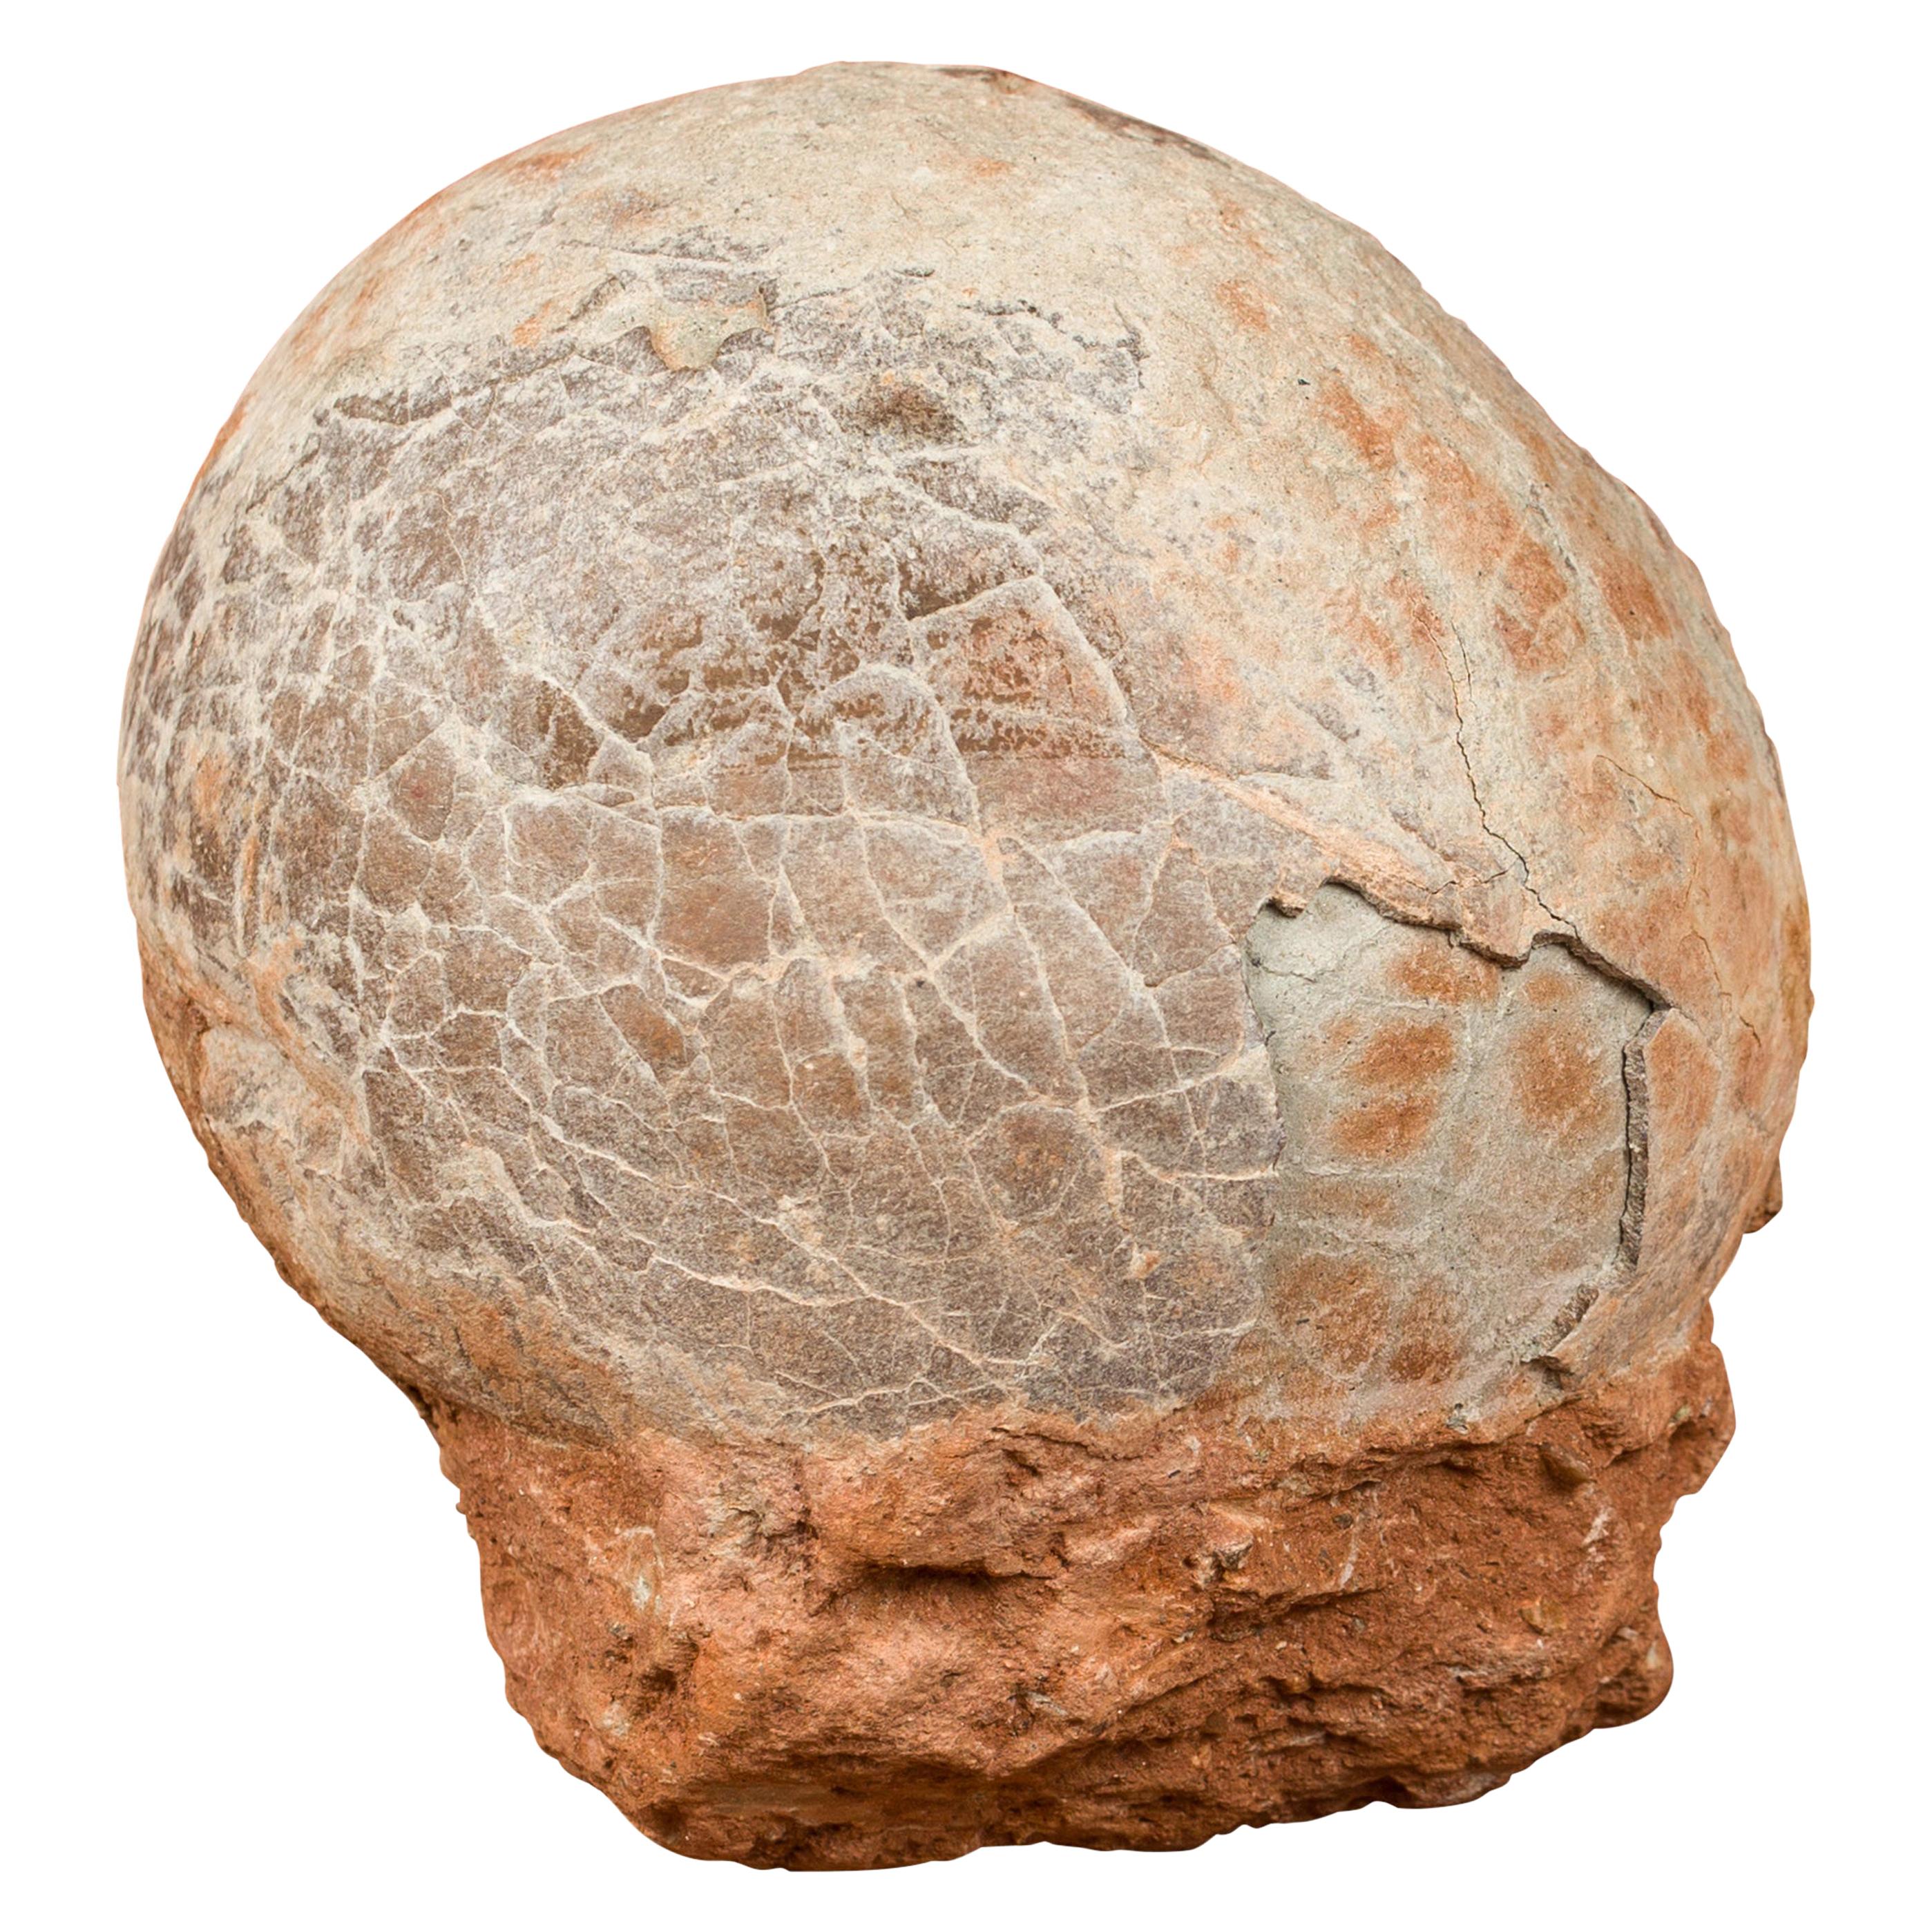 Prehistoric Chinese Petrified Dinosaur Egg with Cracked Surface